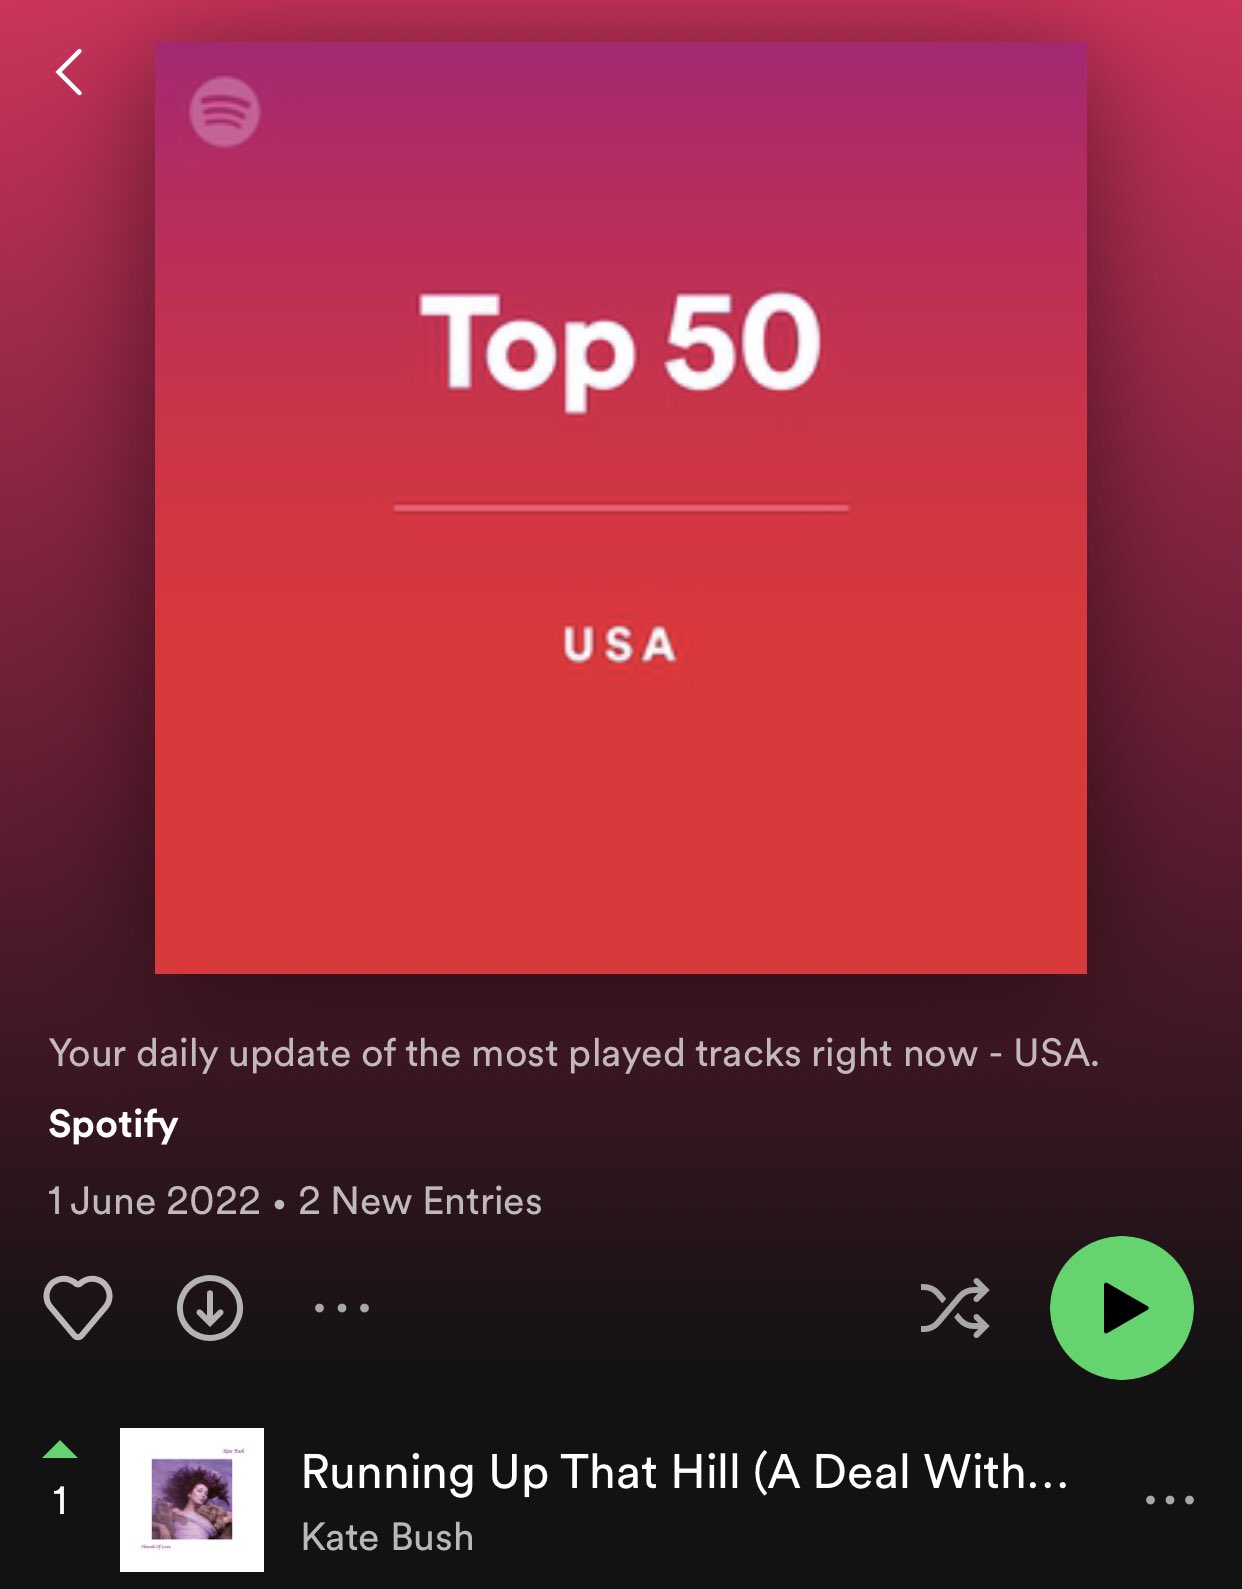 kate bush's aquarius moon on Twitter: "running up that hill is #2 on the global top 50 spotify charts, and the usa, uk, and ireland! https://t.co/6Wa9GKN5v9" Twitter